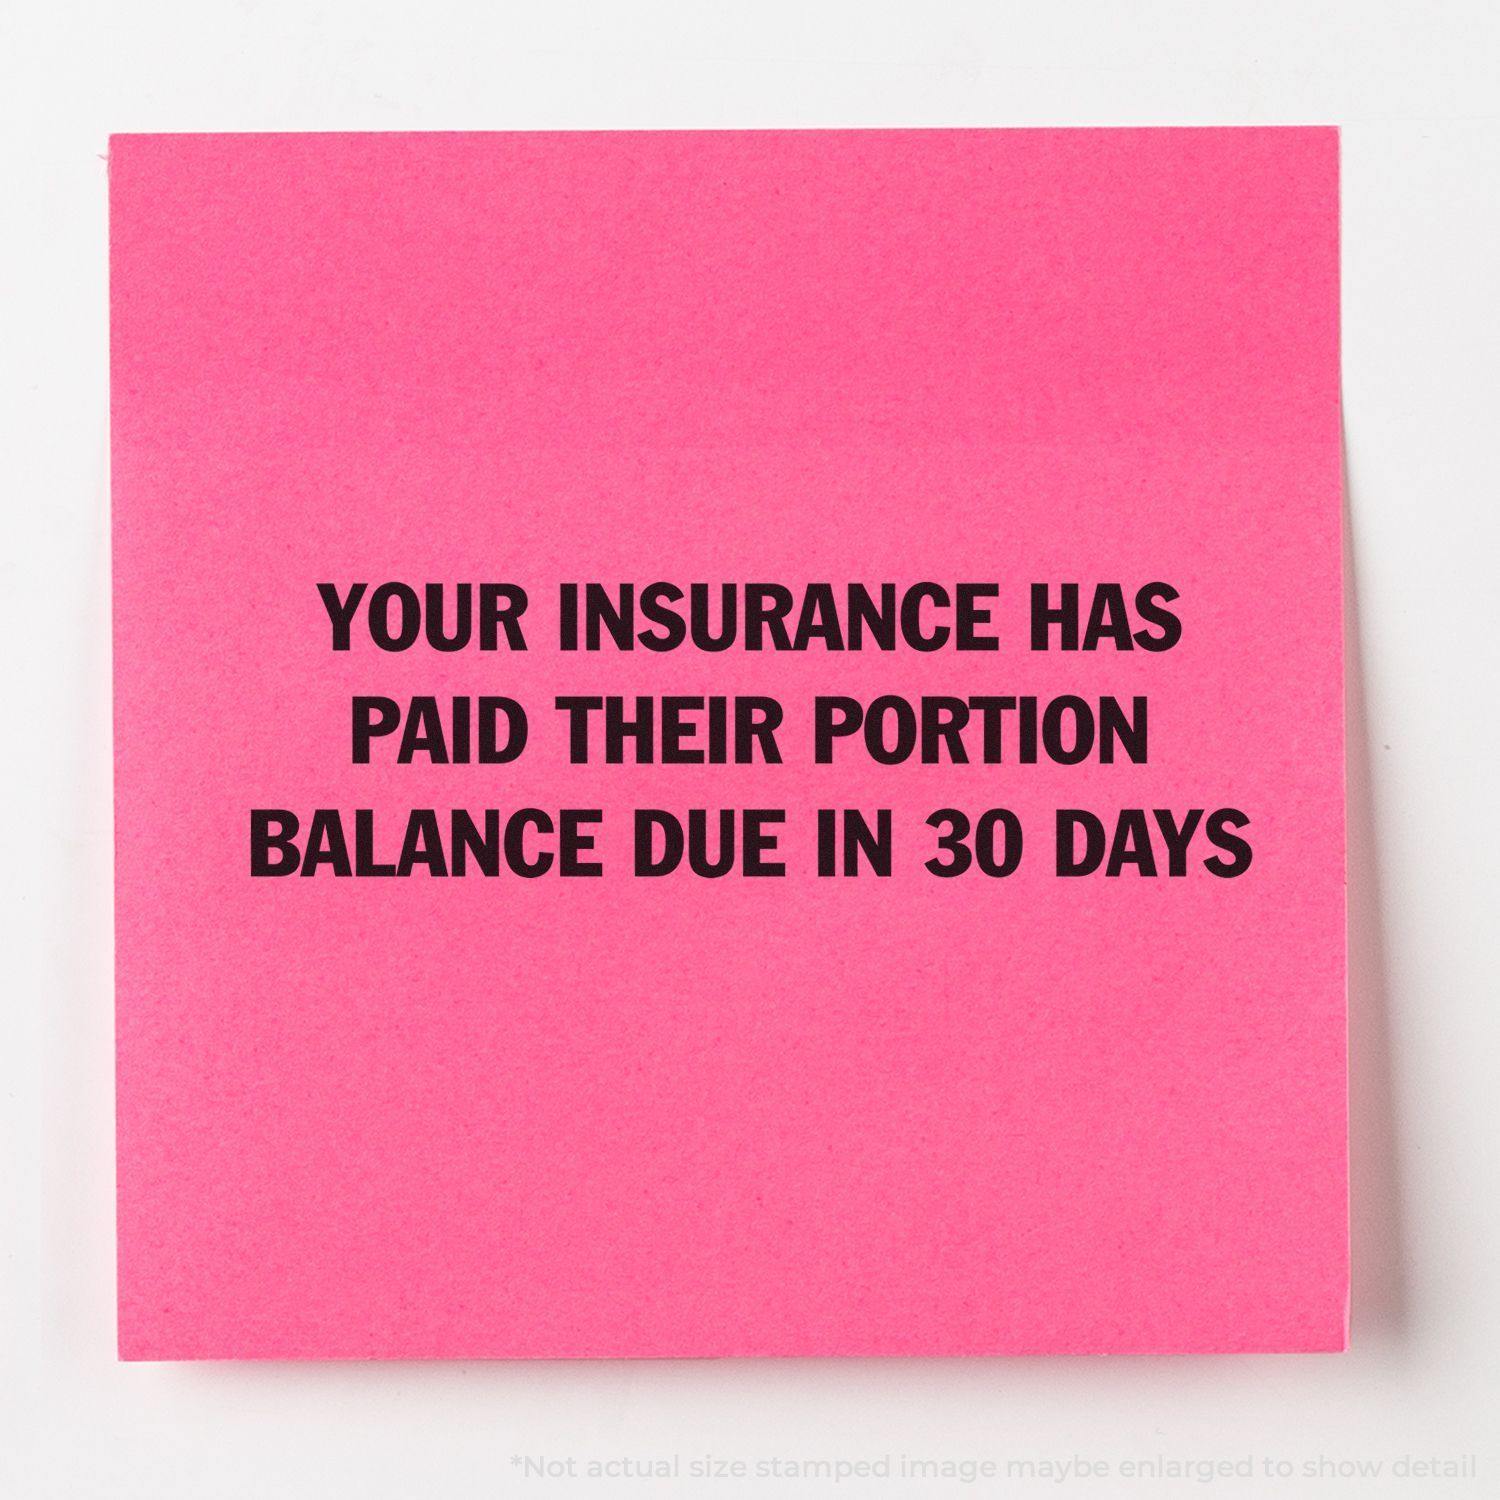 A stock office rubber stamp with a stamped image showing how the texts "YOUR INSURANCE HAS PAID THEIR PORTION" and "BALANCE DUE IN 30 DAYS" are displayed after stamping.